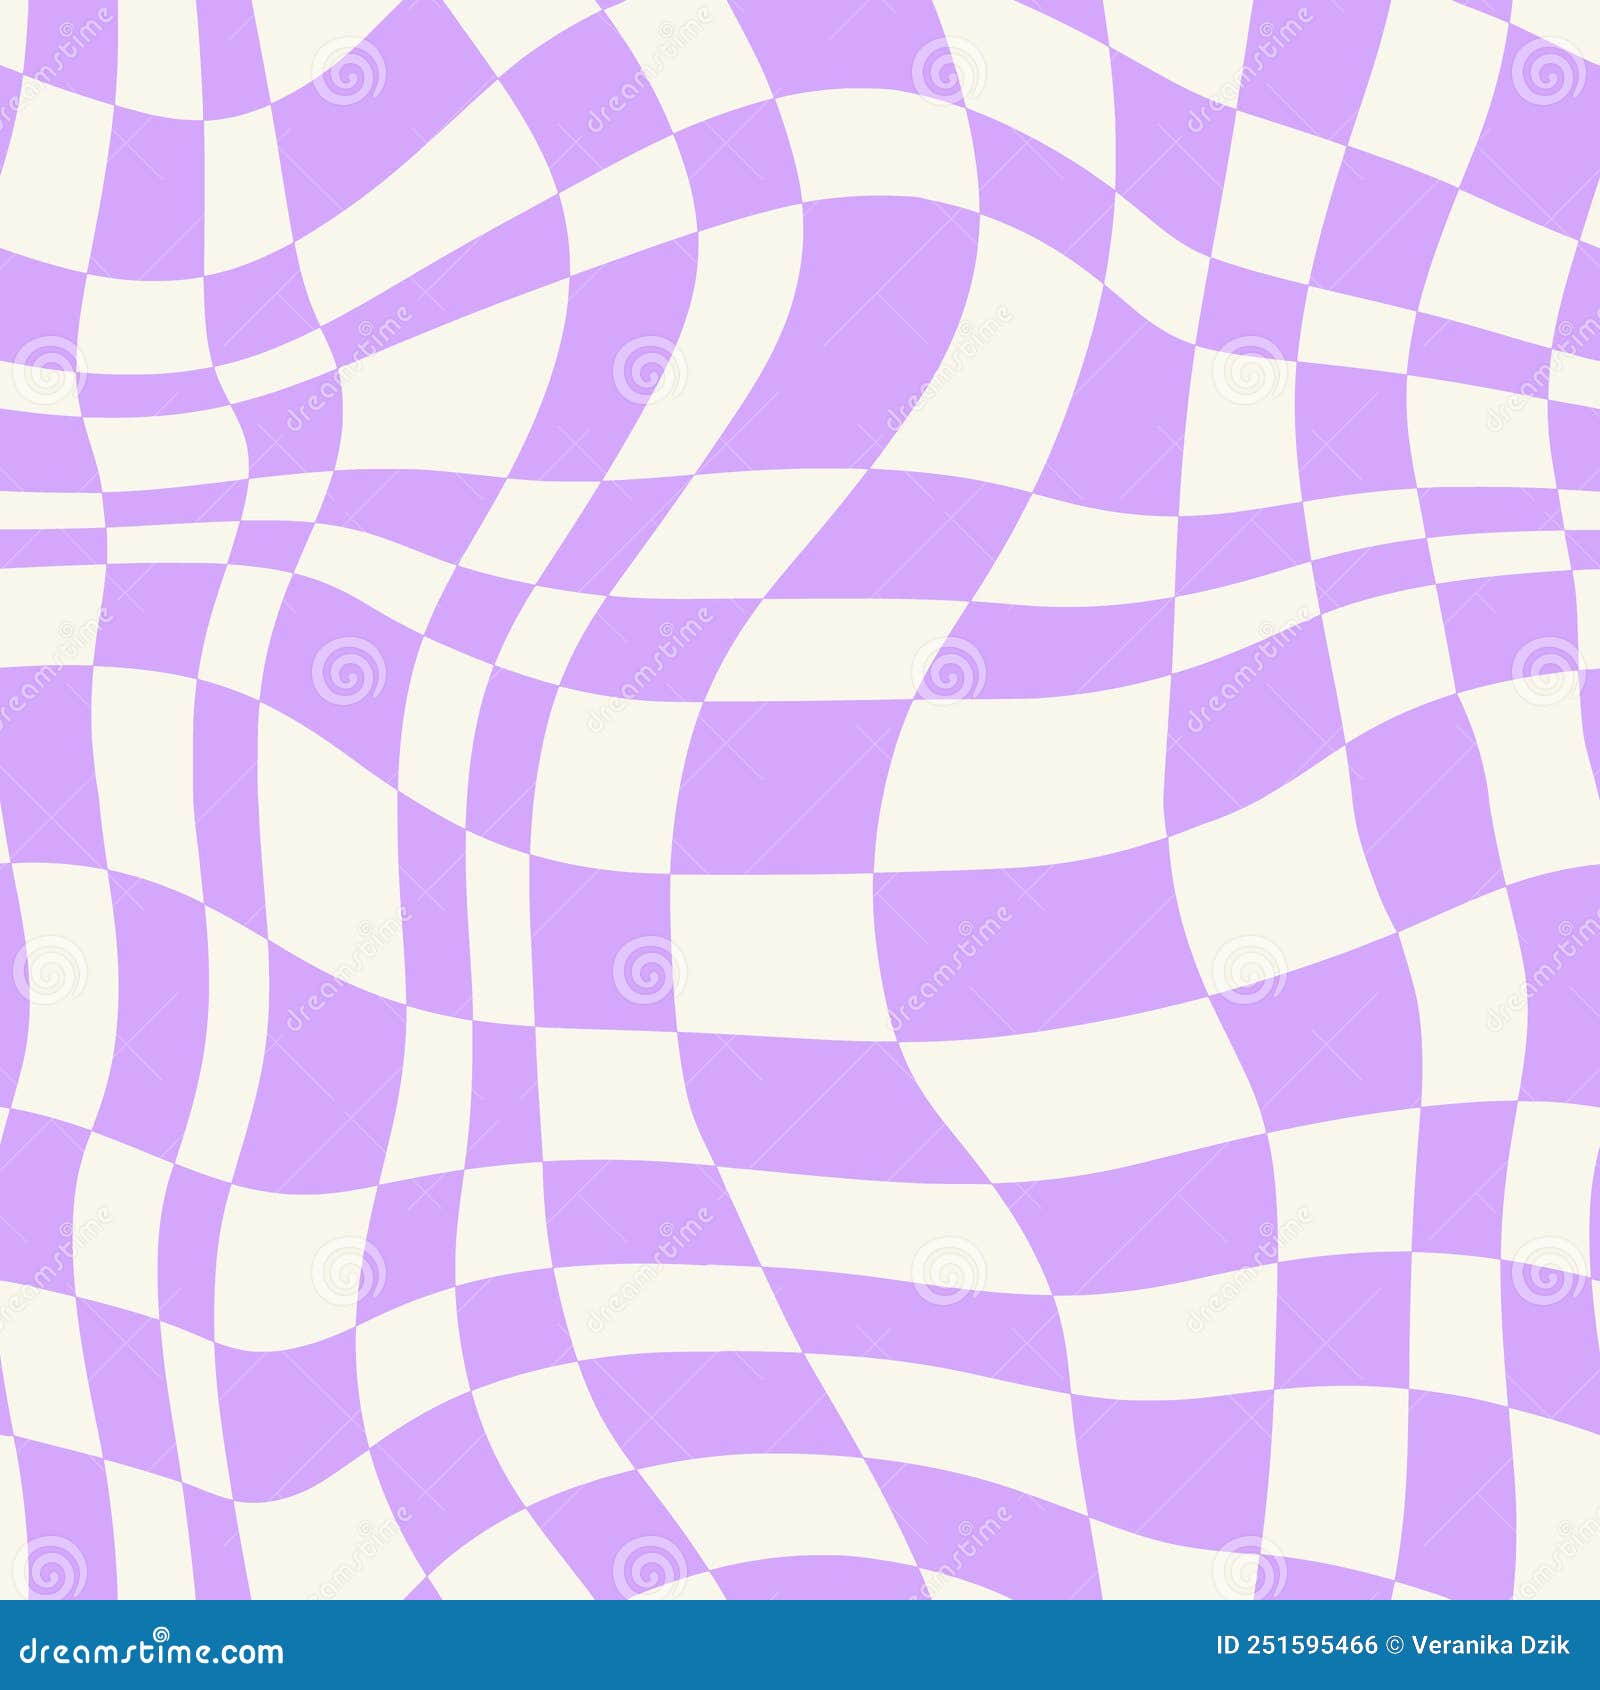 Y2K Distorted Checkered Seamless Pattern. Cute Purple Trippy Groovy ...